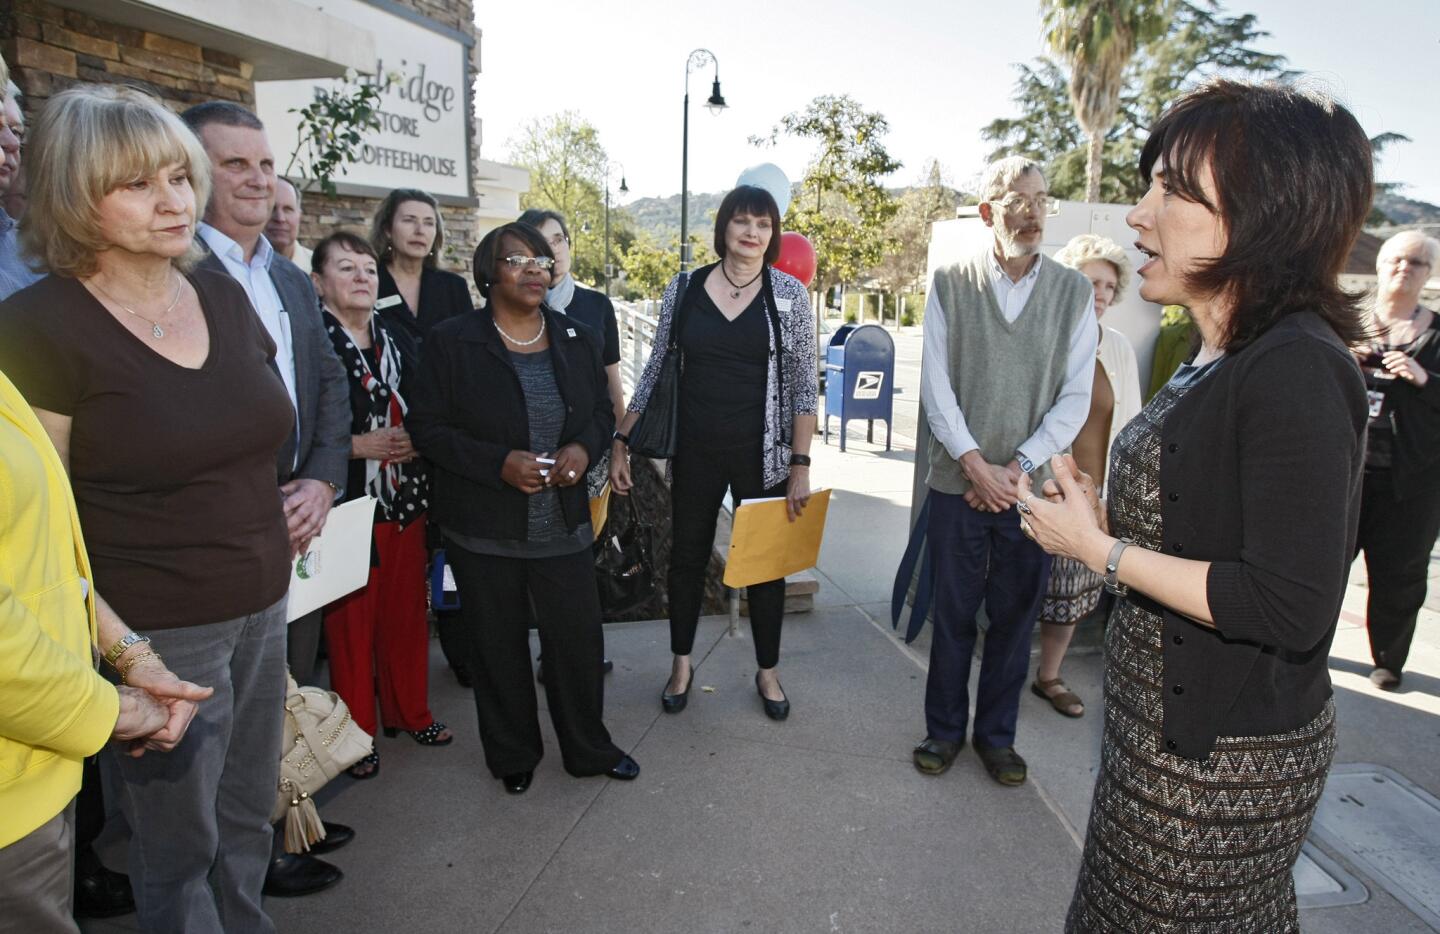 Photo Gallery: First Village Post Office within 35,000 sq. miles opens in La Canada Flintridge